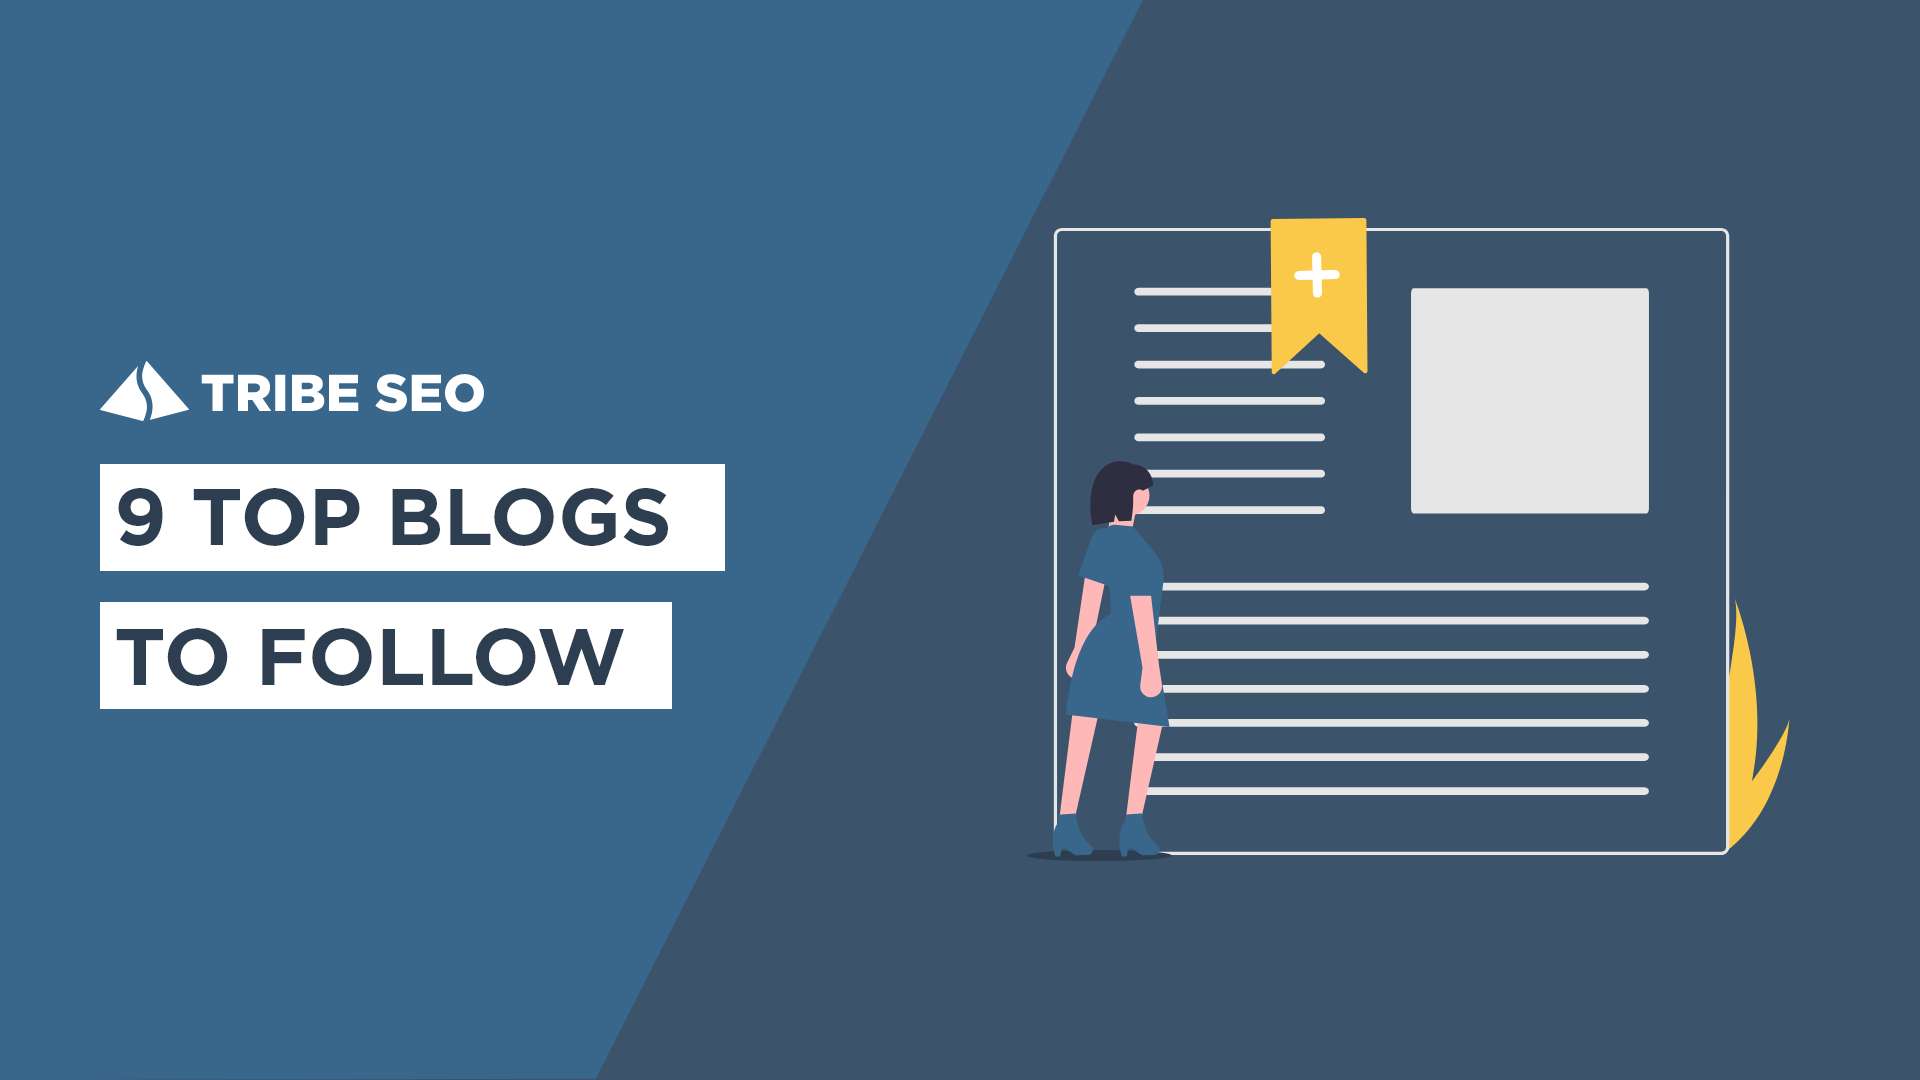 Nine Top Blogs to Follow – Which Are You Missing Out On?